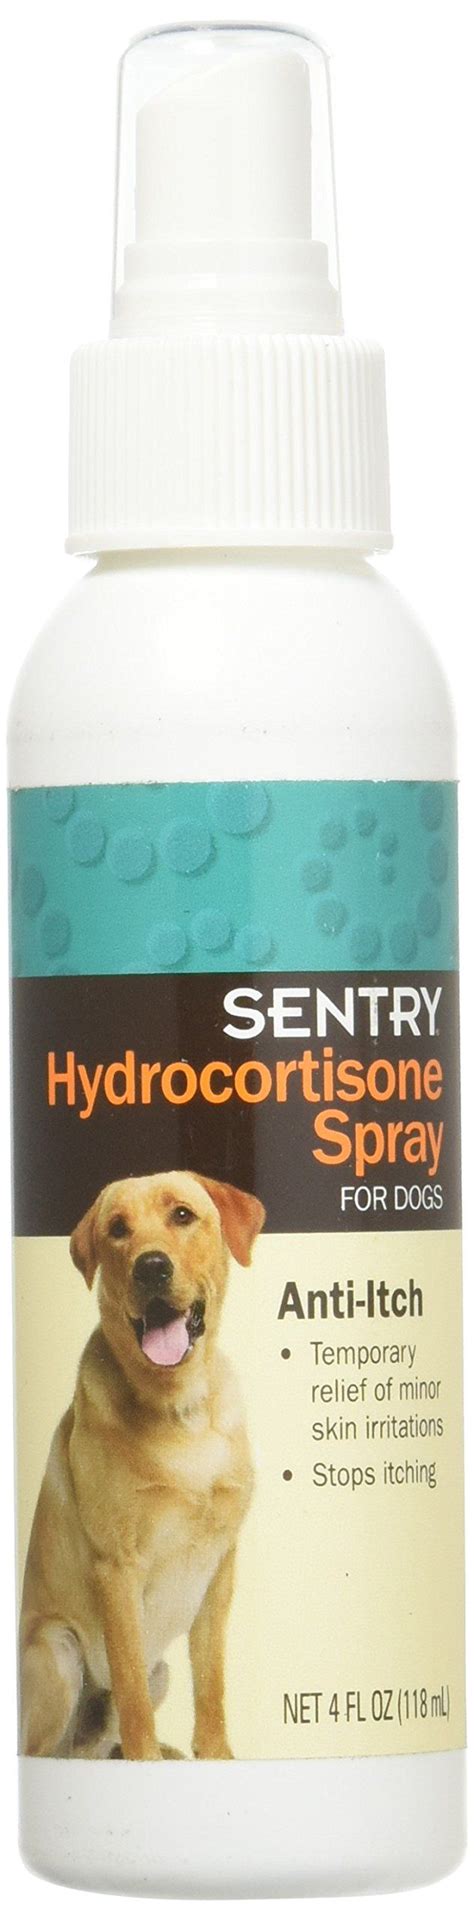 Sentry Hydrocortisone Spray For Dogs 4 Oz Details Can Be Found By